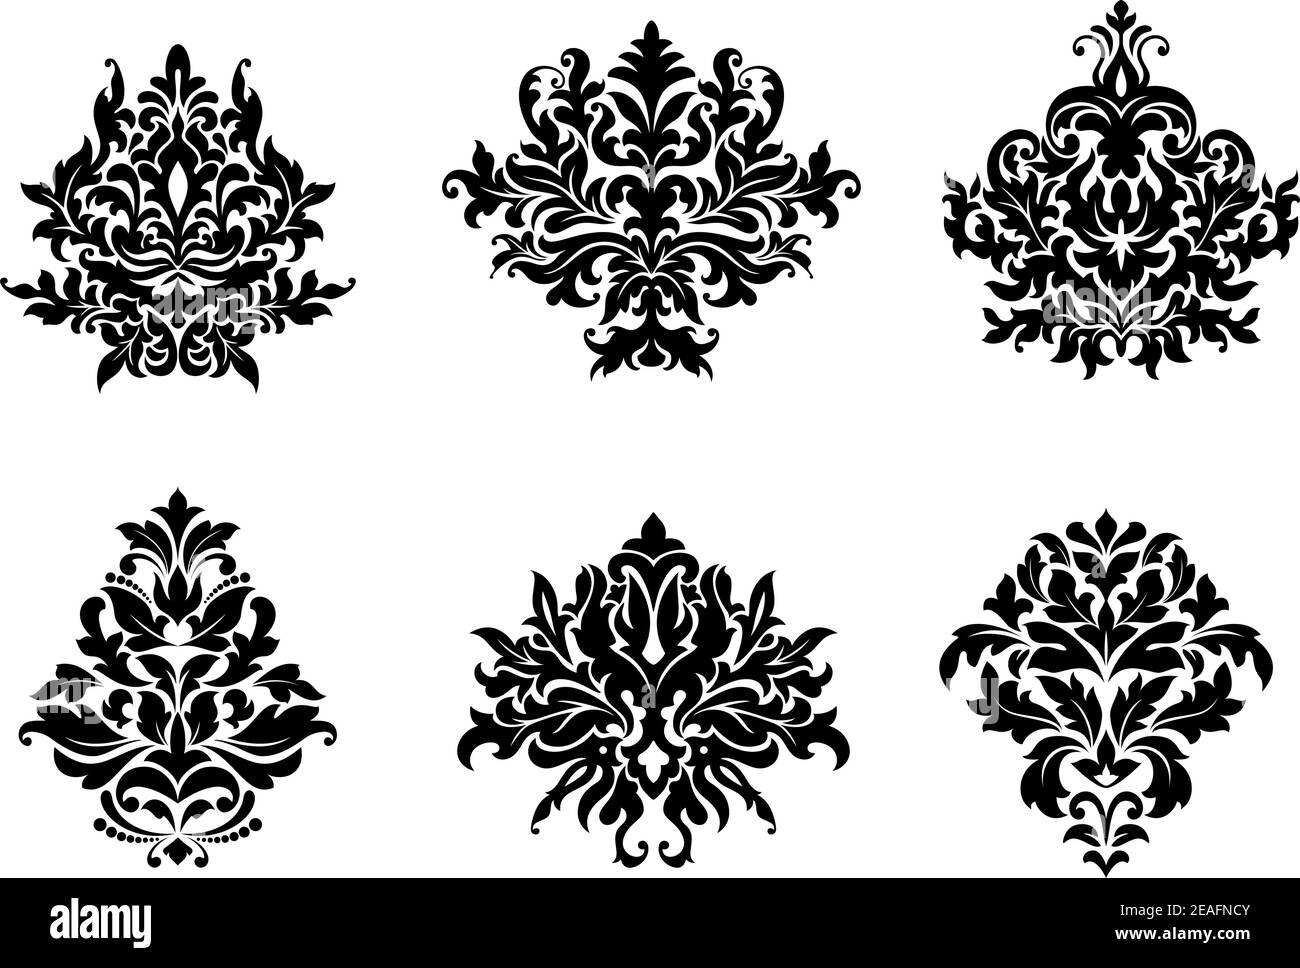 Black silhouetted floral and foliate damask design elements Stock Vector